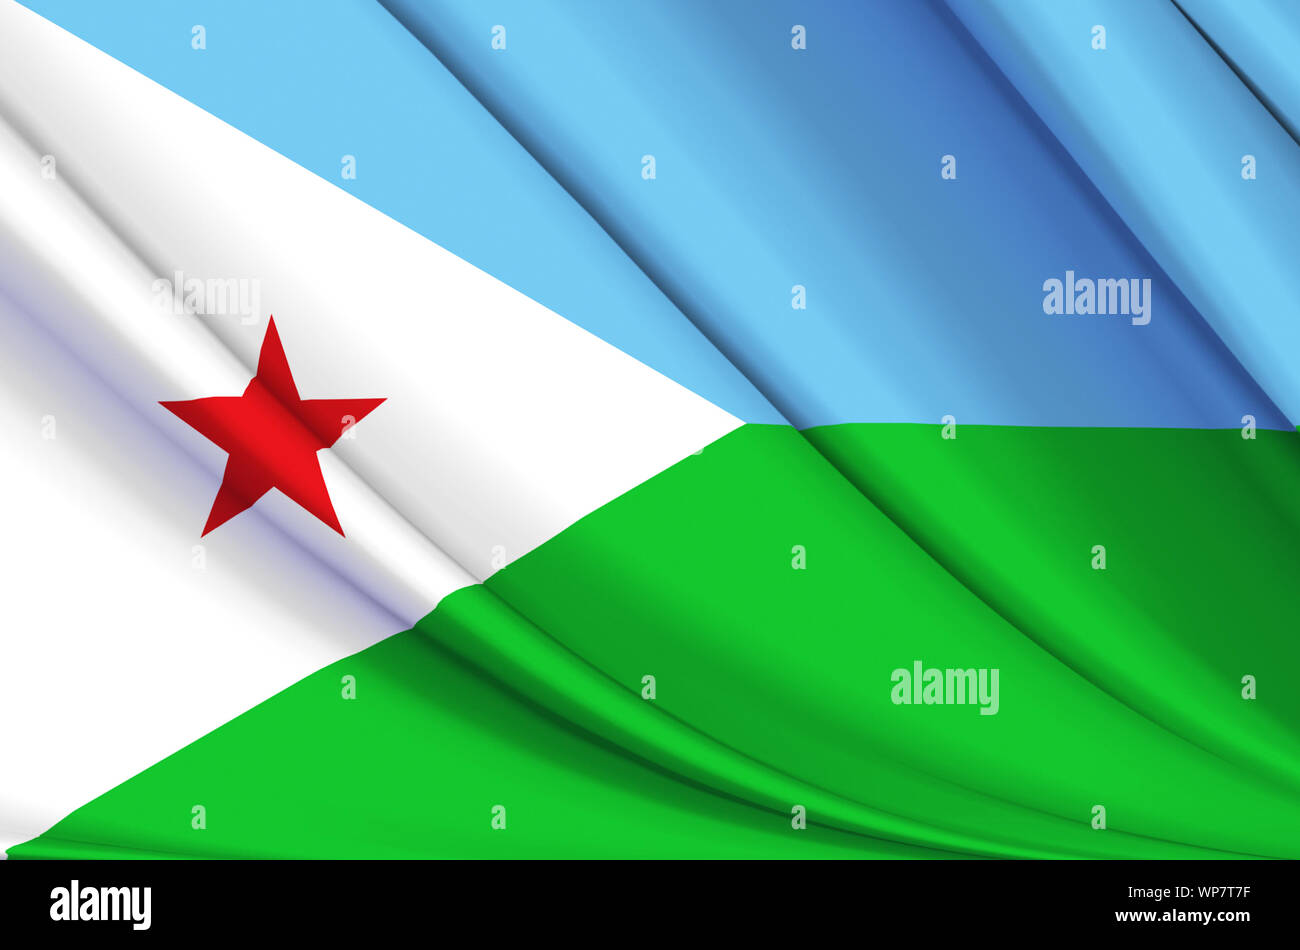 Djibouti waving flag illustration. Countries of Africa. Perfect for background and texture usage. Stock Photo